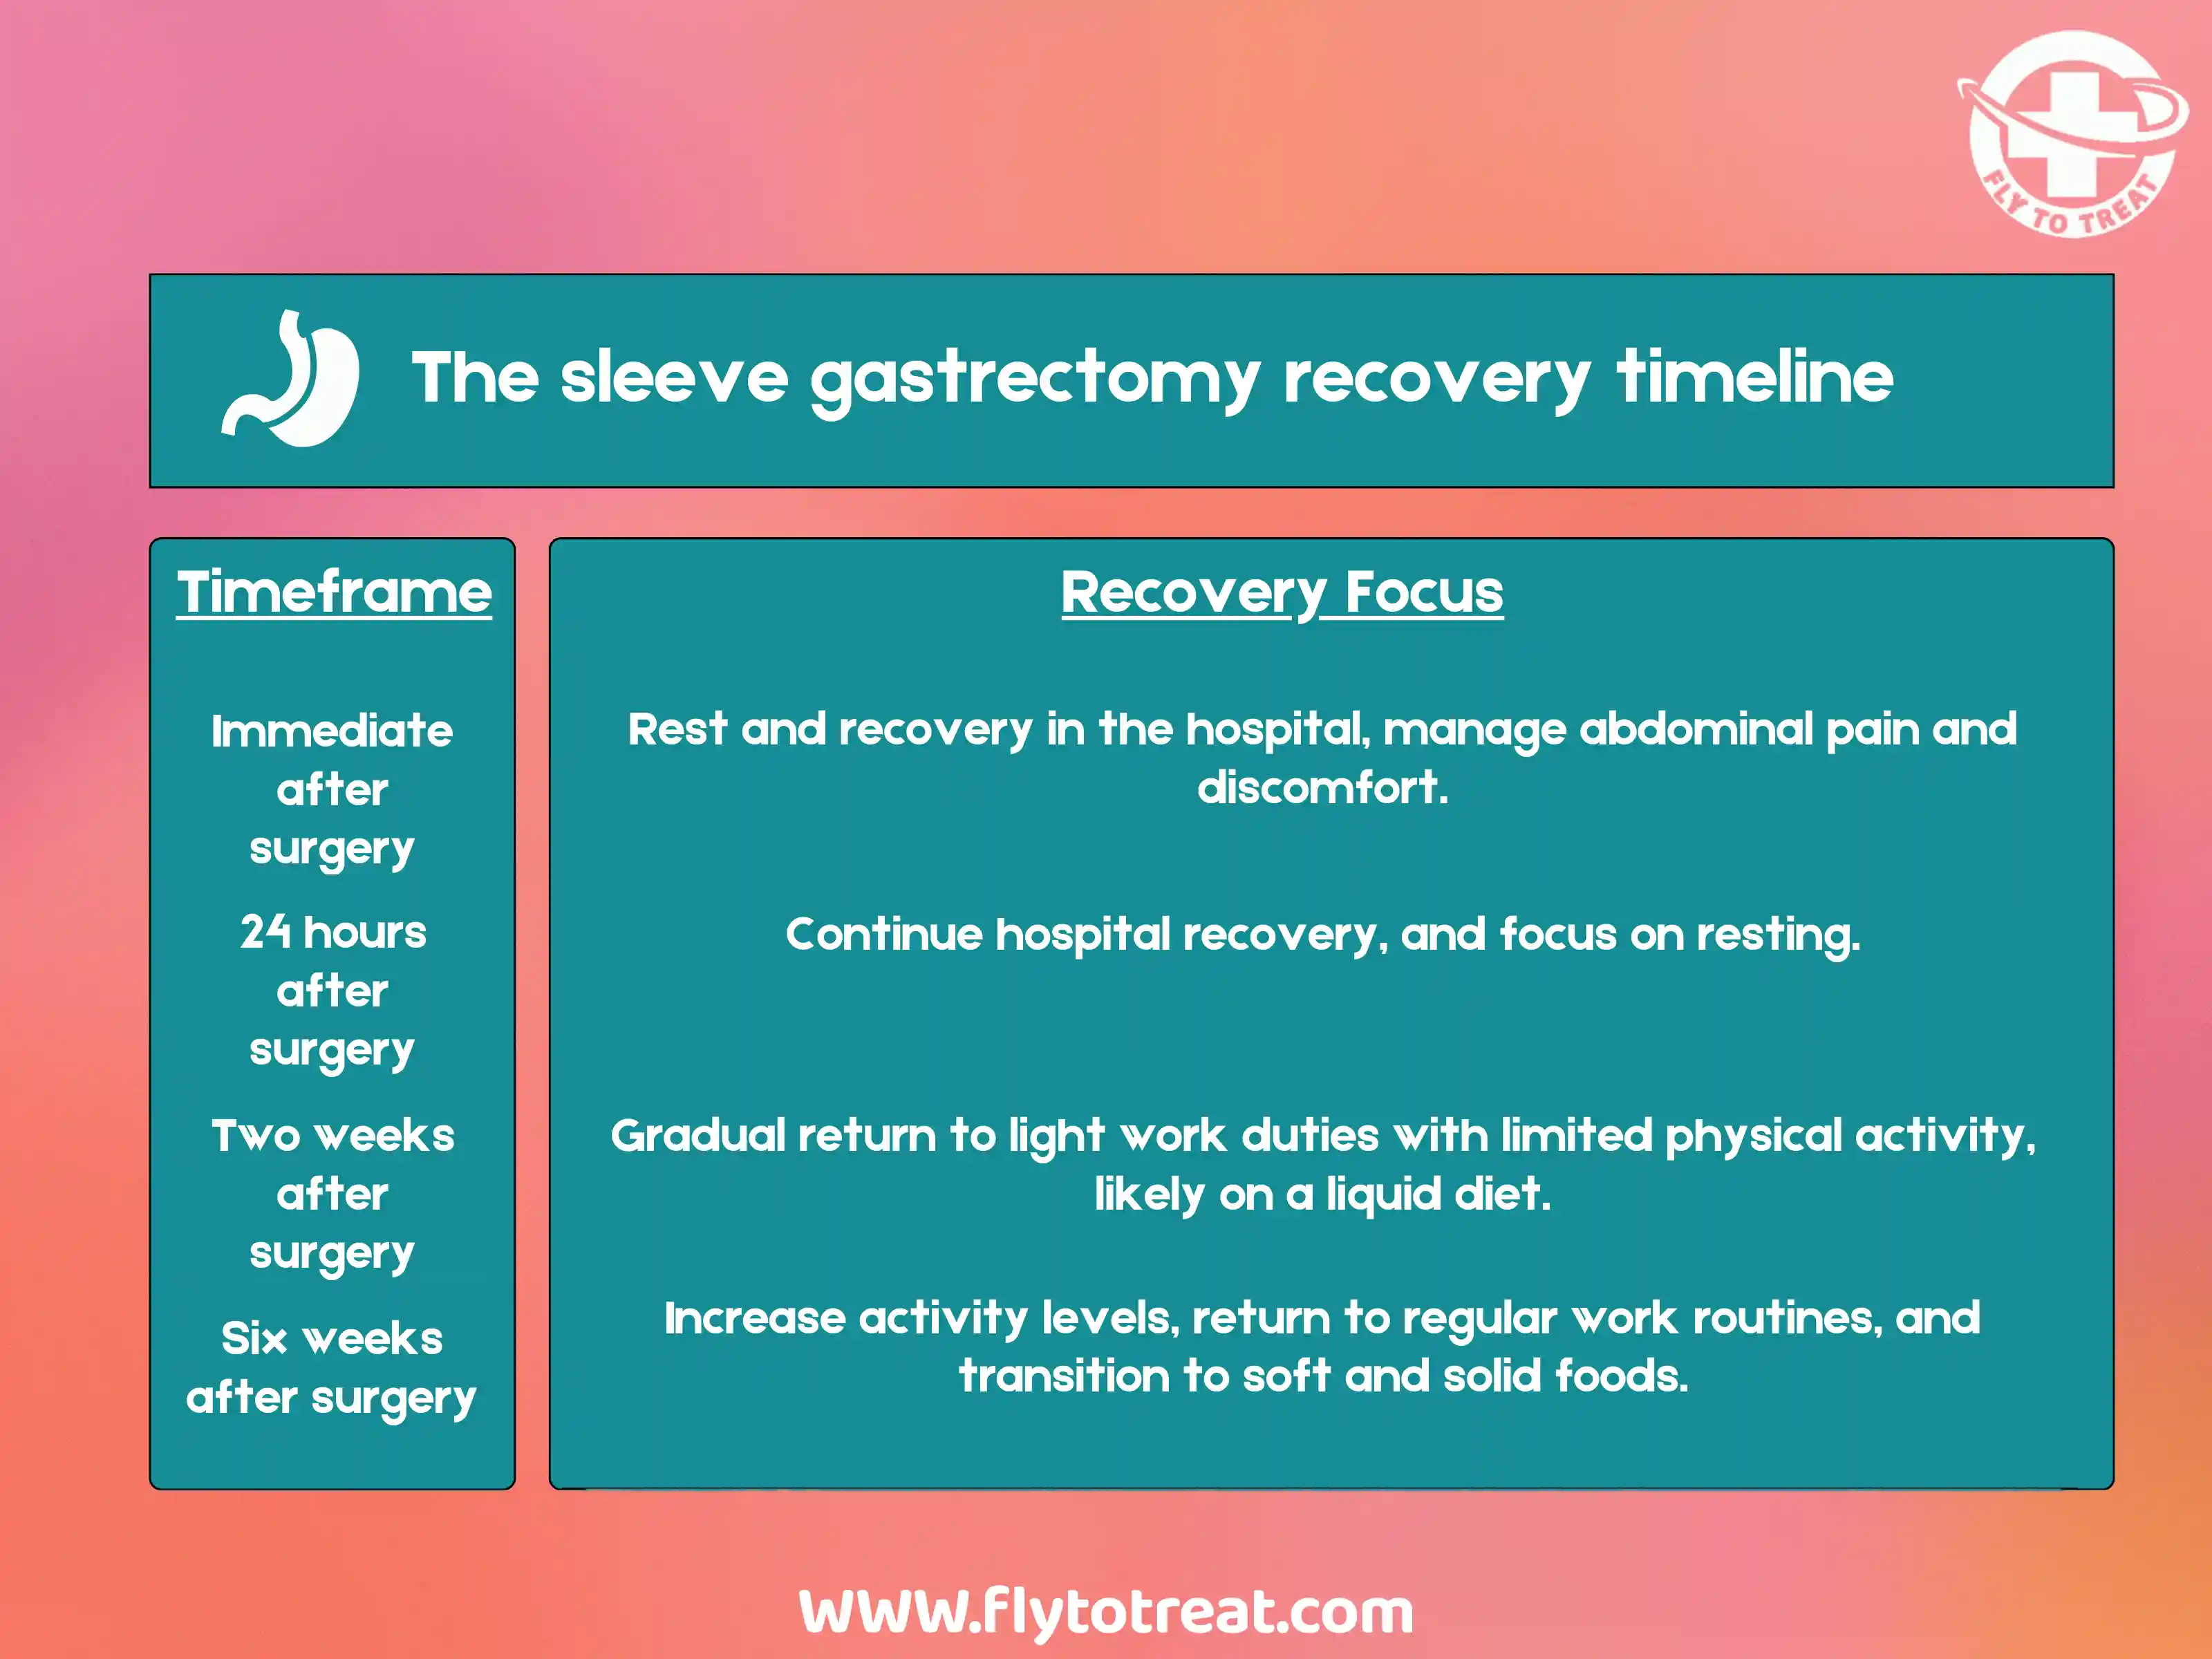 The sleeve gastrectomy recovery timeline